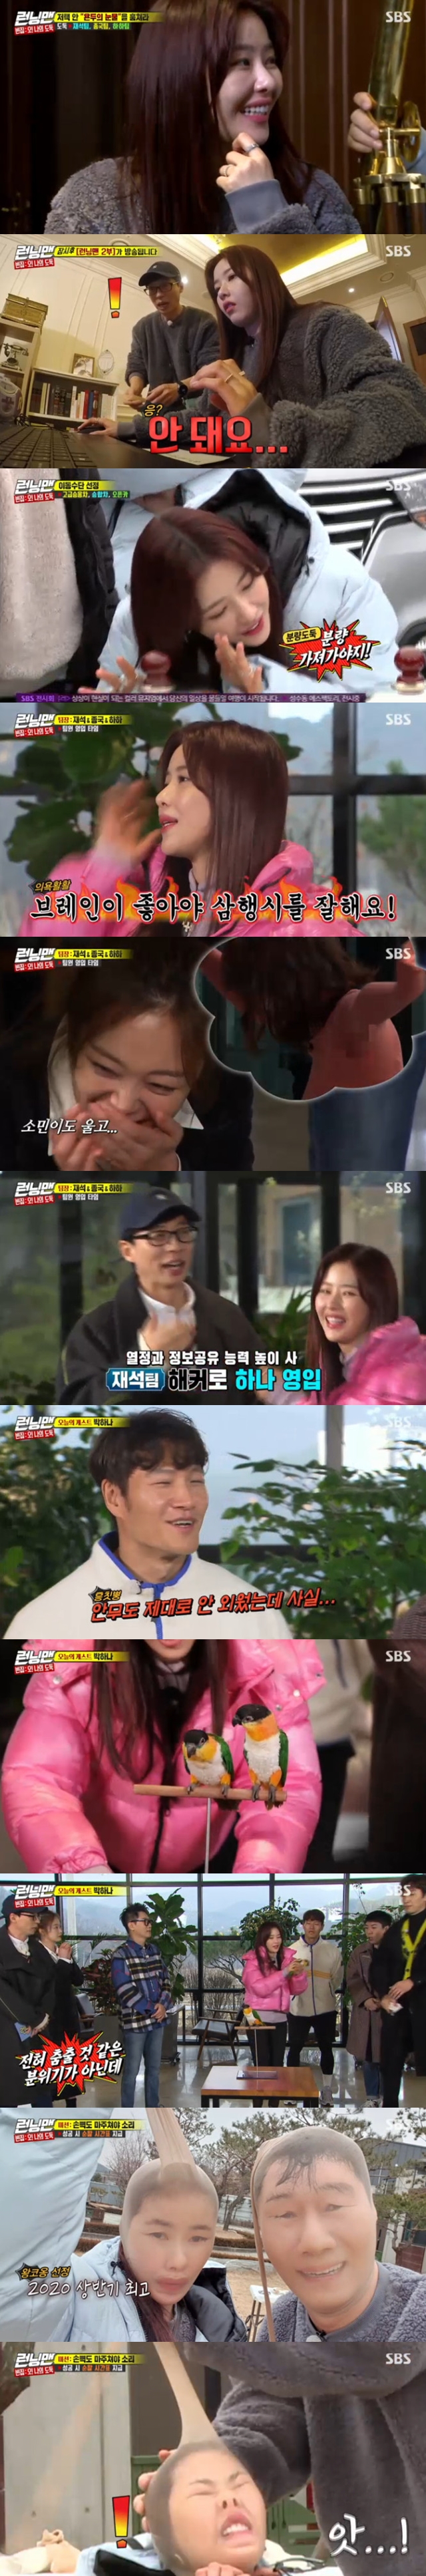 Park Ha-na decided and was broken in Running ManOn SBS Running Man broadcast on February 2, members who turned into thieves to take over 30 billion worth of super-luxury jewels were tense Thieves Race Empty House: Oh!My Thiefs unfolded: The members and guest park Ha-na had to turn into thieves to steal the best jewel, Yondus Tears, from an empty mansion together.Park Ha-na, not the first appearance of Running Man, predicted an unusual presence as soon as it appeared.Before the full-scale race began, he showed his utmost efforts to diverge his personal skills.Park Ha-na opened the door with EDM dance personalizer without self-introduction, and showed EDM dance with the first companion parrot Nana to make the members burst.Driving this momentum, Park Ha-na even showed turbo dance in front of the original song Turbo Kim Jong-kook.Park Ha-na danced with pink padding and leather jackets and danced hard to prepare for the Black Cat Nero music, but it was not so bad, and I tried to go to the progression to say Turbo dance was funny.Eventually, the original composer Kim Jong-kook, Yang Se-chan and Haha came together and completed the 2020 Top Goal Turbo Stage with perfect chemistry, and Yoo Jae-Suk said, You should not say that you prepared dance.We finished the plate that Park Ha-na opened, he said, blowing a stone fastball and making everyone laugh.Park Ha-na was prepared by the members in the name of the members, and surprised the members with their untiring passion and thorough readiness.In particular, the ambitiously prepared Jeon So-min three-way poem recalled the Jeon So-min humiliation by burying water in his armpits and humiliated Jeon So-min once again.However, Park Ha-na said, I went to get water, but I already had sweat on my armpits. The members complained about Park Ha-nas TMI (Two Murch Information) saying, Did you have to do that?It was the national MC Yoo Jae-Suk who recognized Park Ha-na like that.Yoo Jae-Suk was moved by Park Ha-nas extraordinary passion and recruited Park Ha-na to his team with Anonymous.Park Ha-na then expressed a desire for the time of mobile selection; it also exploded, but the members noted Park Ha-nas scorn.In particular, Haha pointed out that Park Ha-na also smells of shit hand.Park Ha-nas passion exploded in the high-level mission, where they had to face each other while wearing stockings.Park Ha-na, who was wearing stockings, was in a messy face even though she was an actress, but she laughed at the mission, including taking a selfie with Ji Suk-jin without fear of being broken.Park Ha-na also teamed up with Yoo Jae-Suk to show off her fantasy chemistry.The two men showed their hands and feet fit, with Park Ha-na going to match the password released by team leader Yoo Jae-Suk.In addition, Anonymous Park Ha-na played a crucial moment.Park Ha-na found out that mixing the color of the balloon gives you a hint and drew rave reviews from Yoo Jae-Suk that I did the right thing.bak-beauty